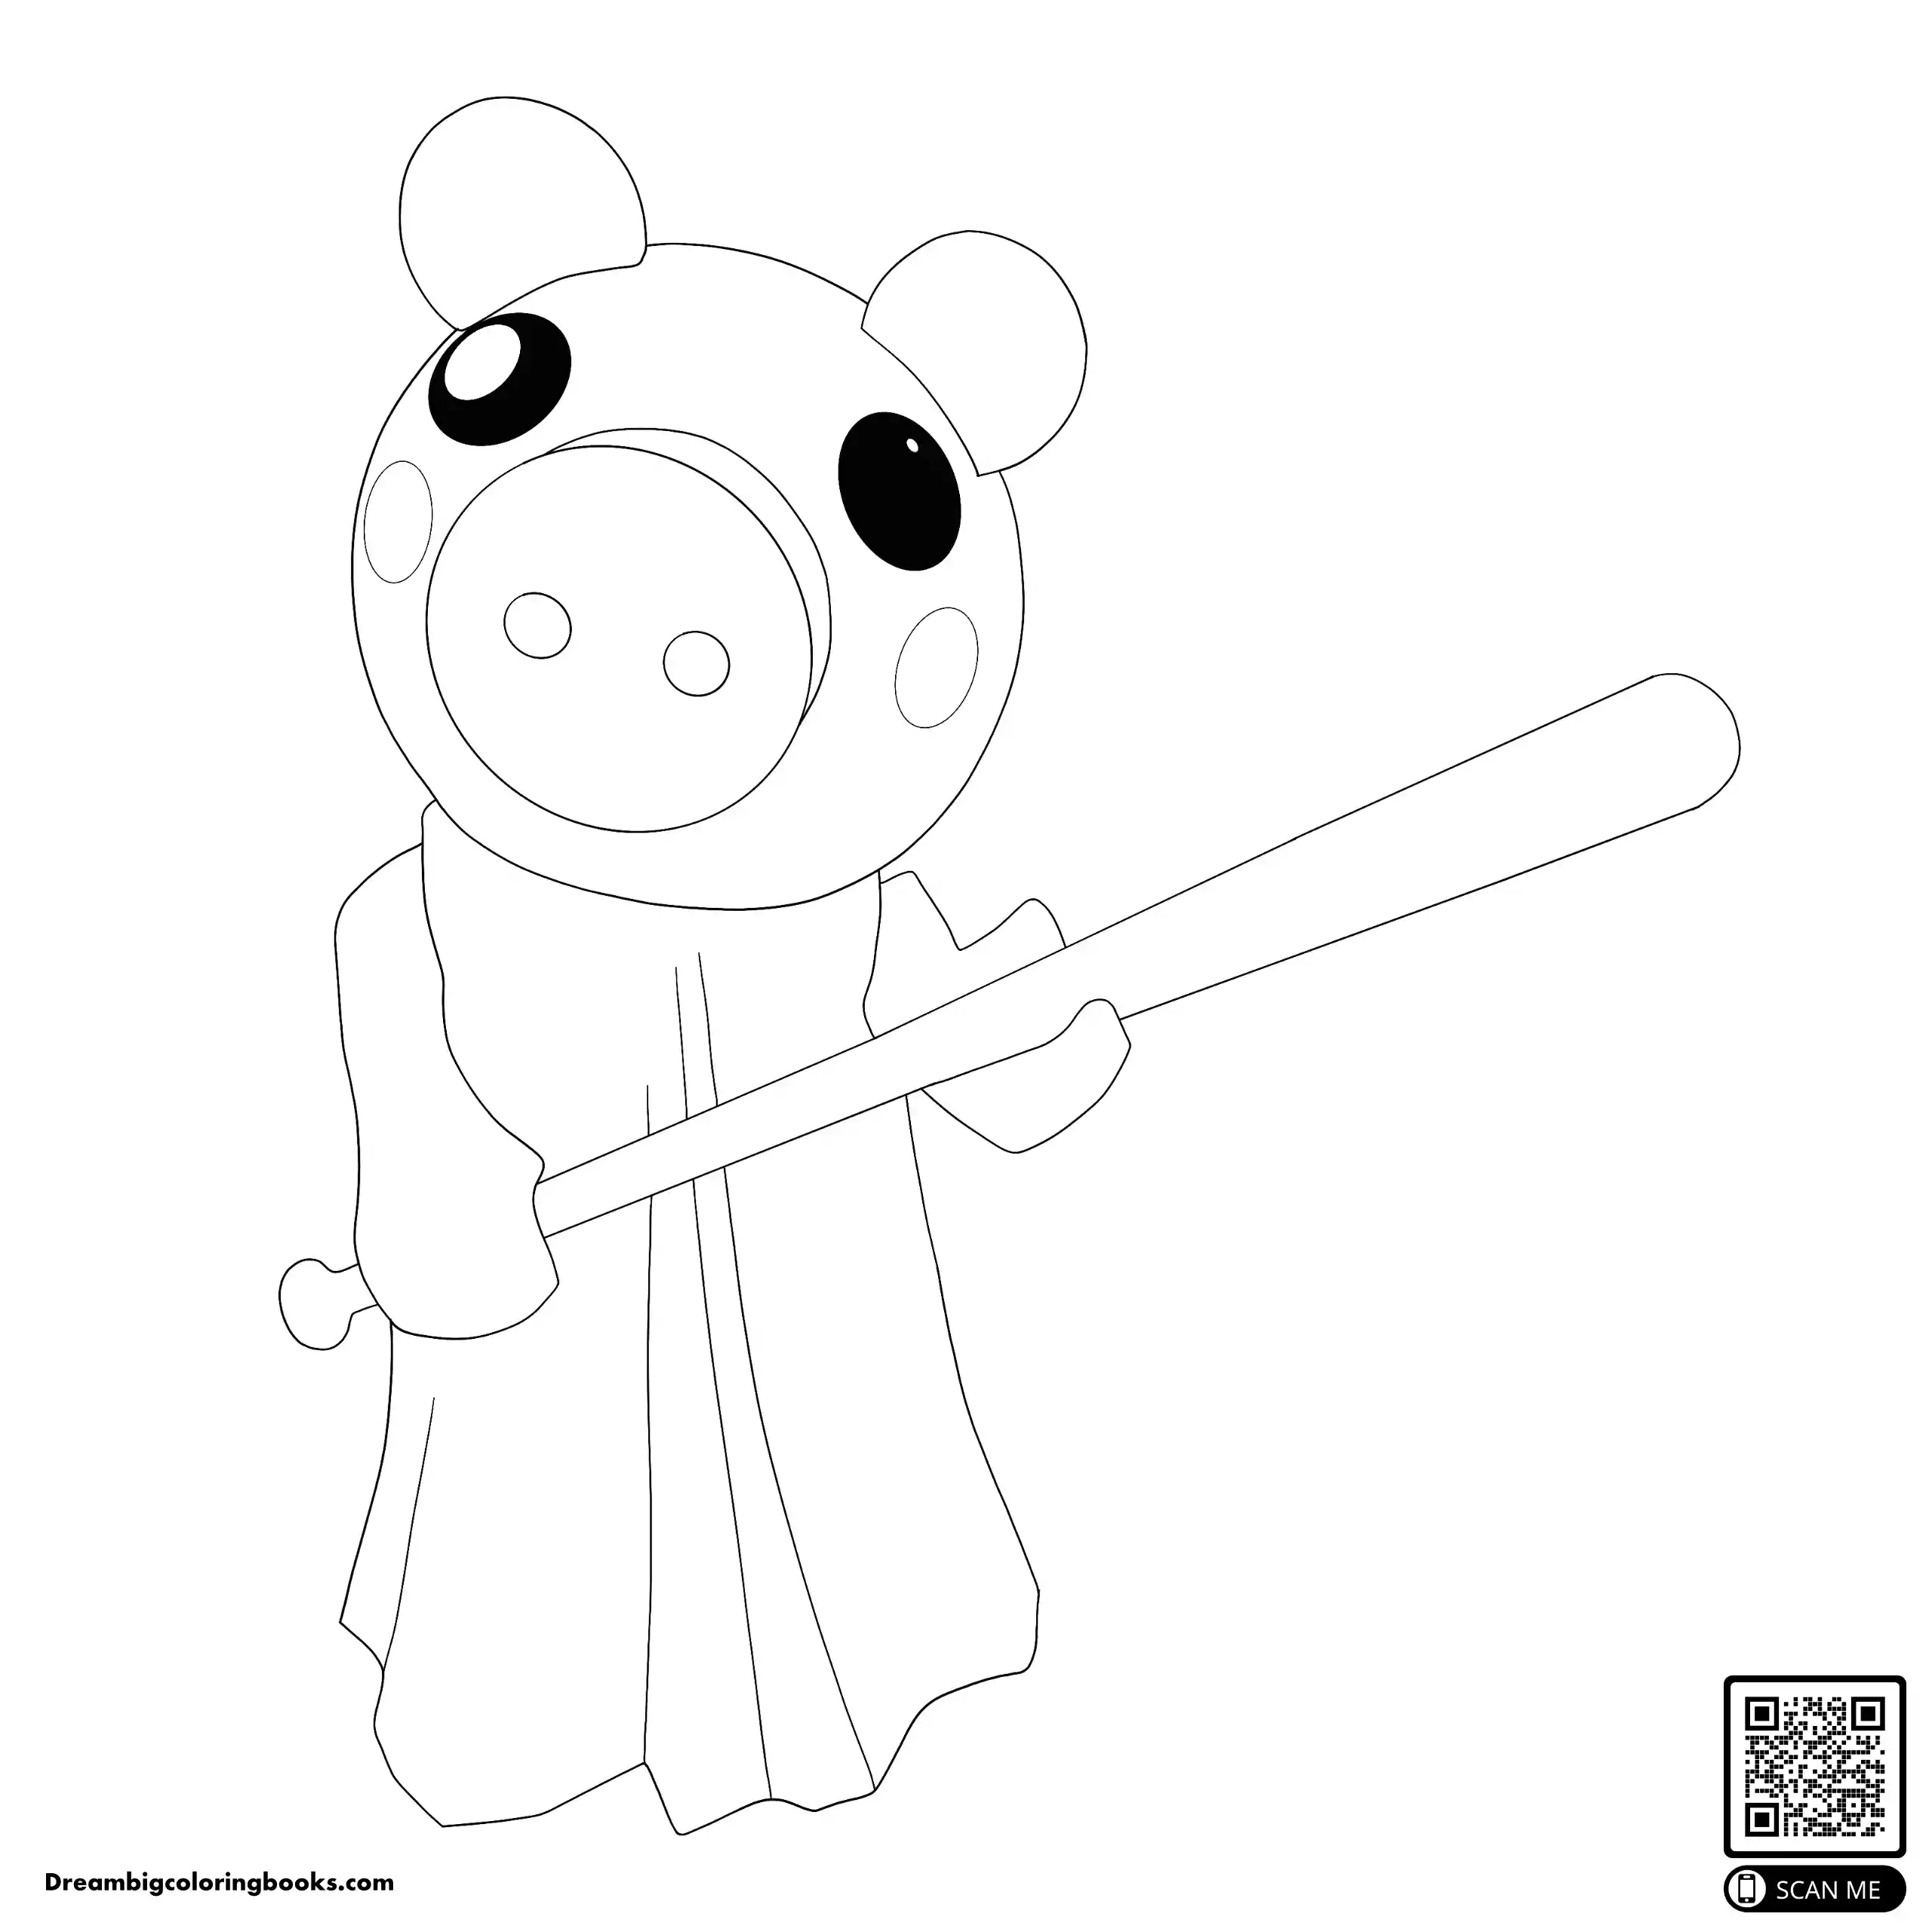 Roblox Piggy coloring page